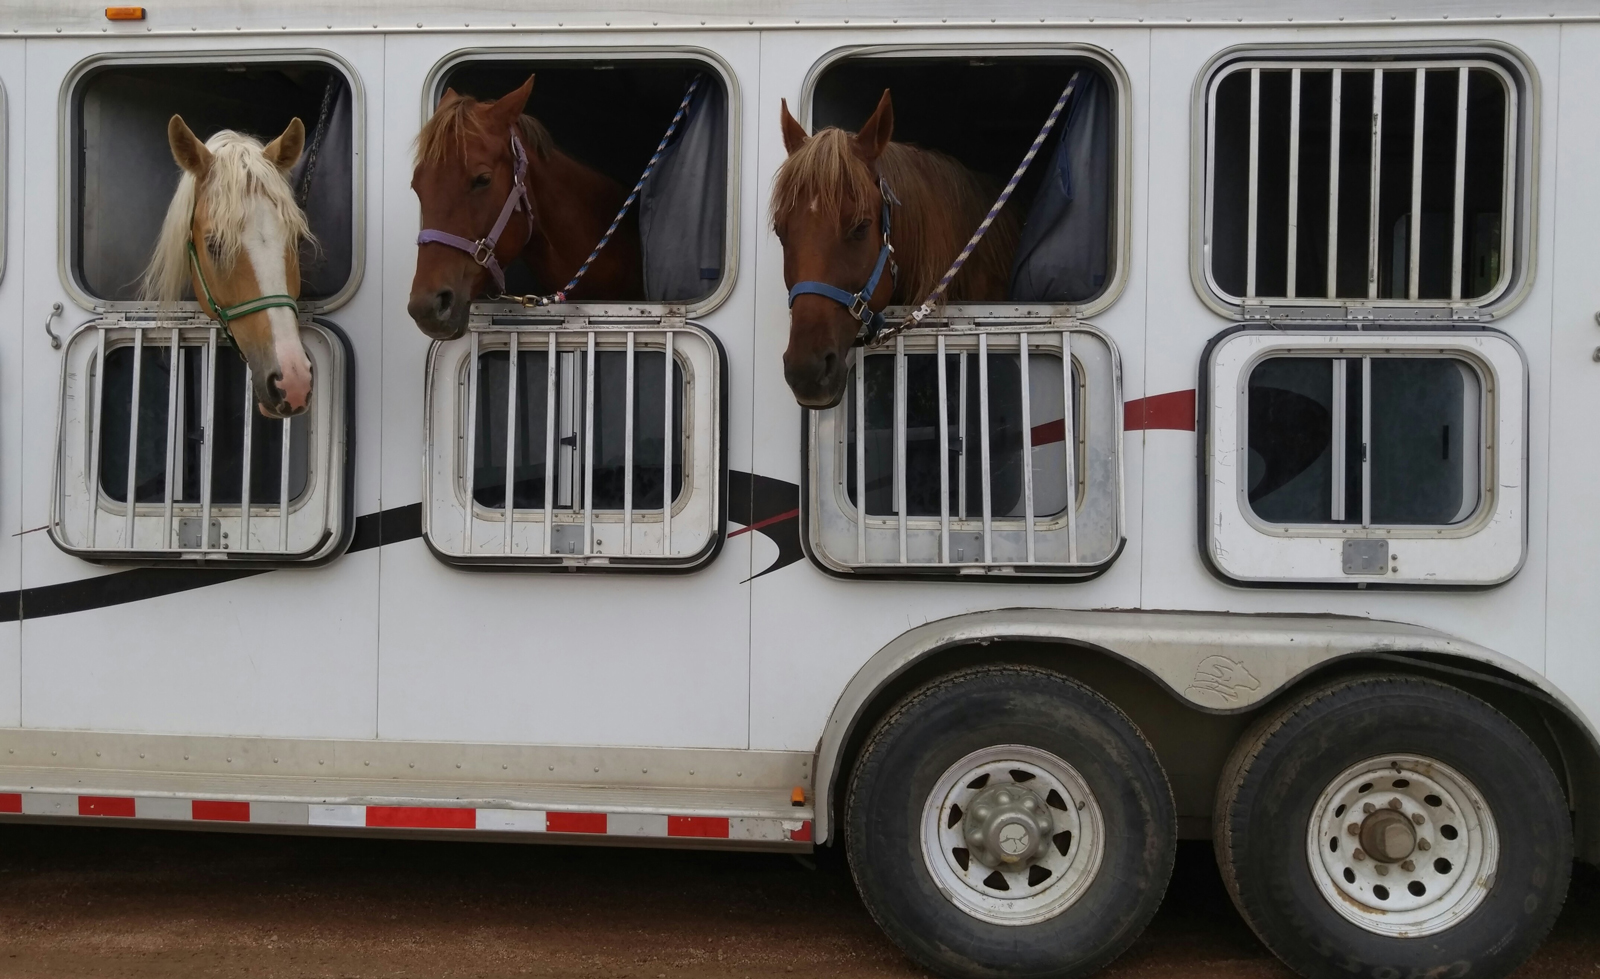 Three horses in a horse lorry stick their heads out of seperate windows